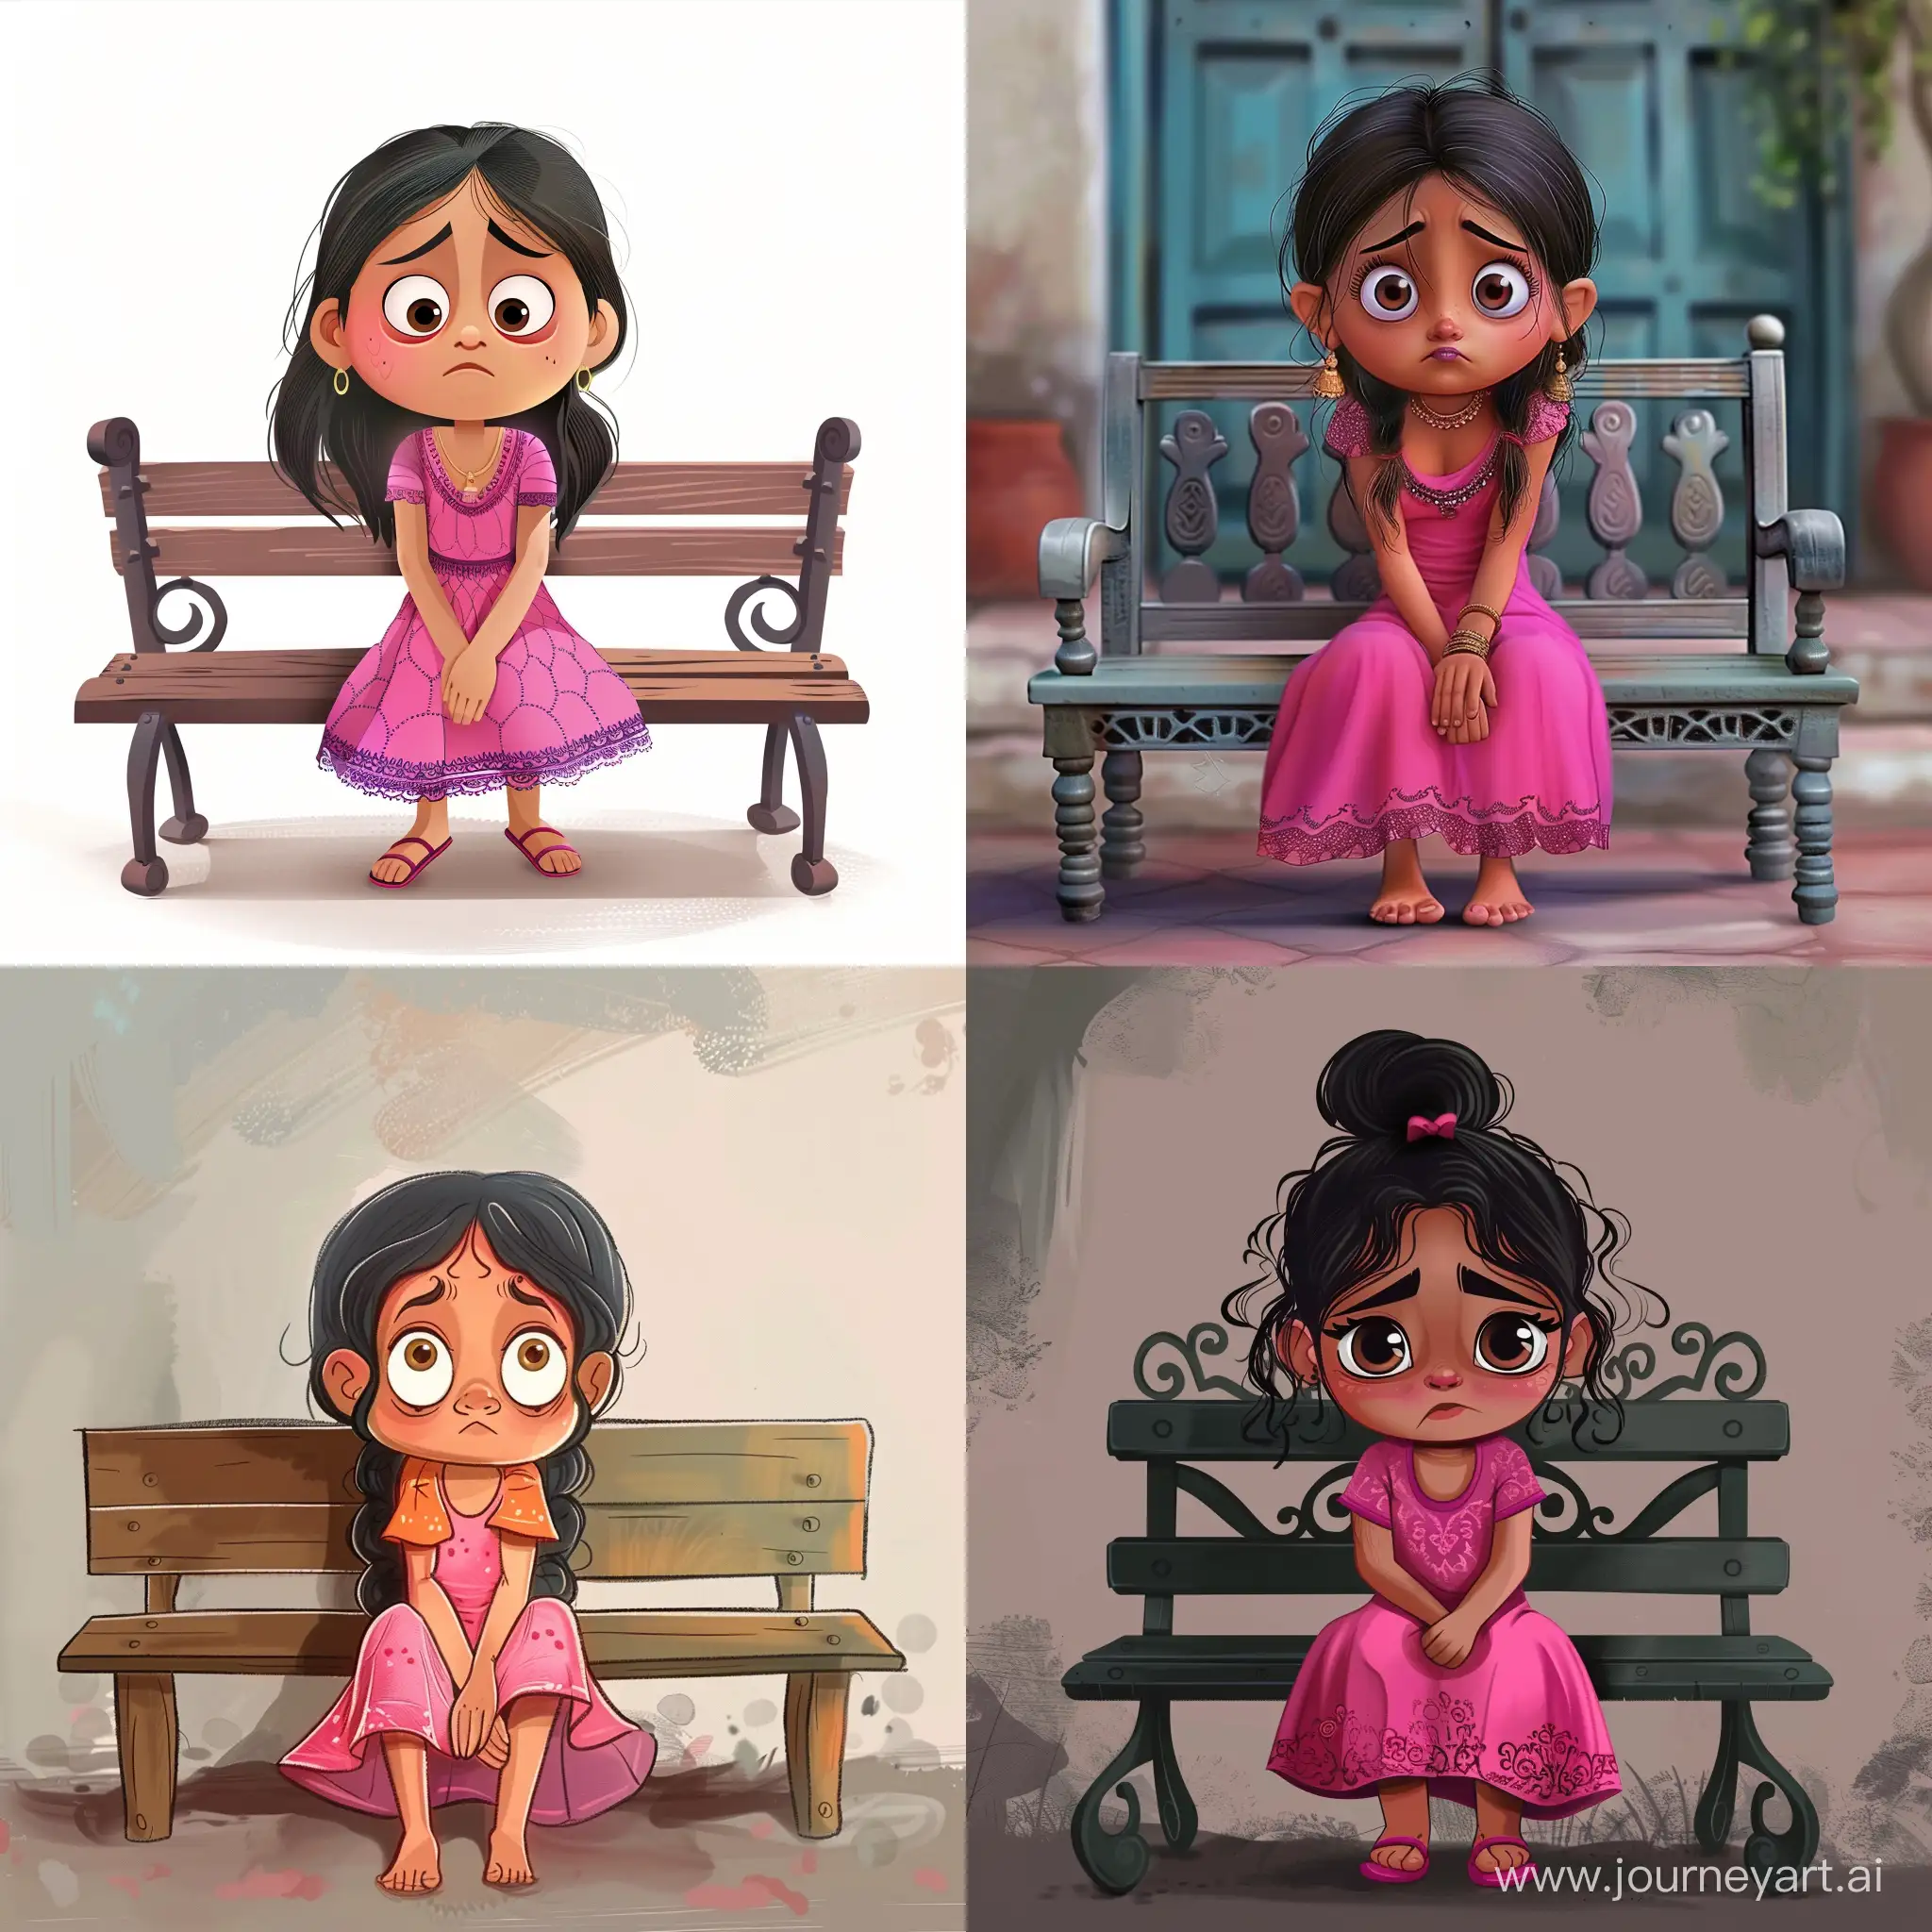 make eyes movement girl cartoon sitting in bench and she is vary sad pink dress on nepali face--ar 9:16